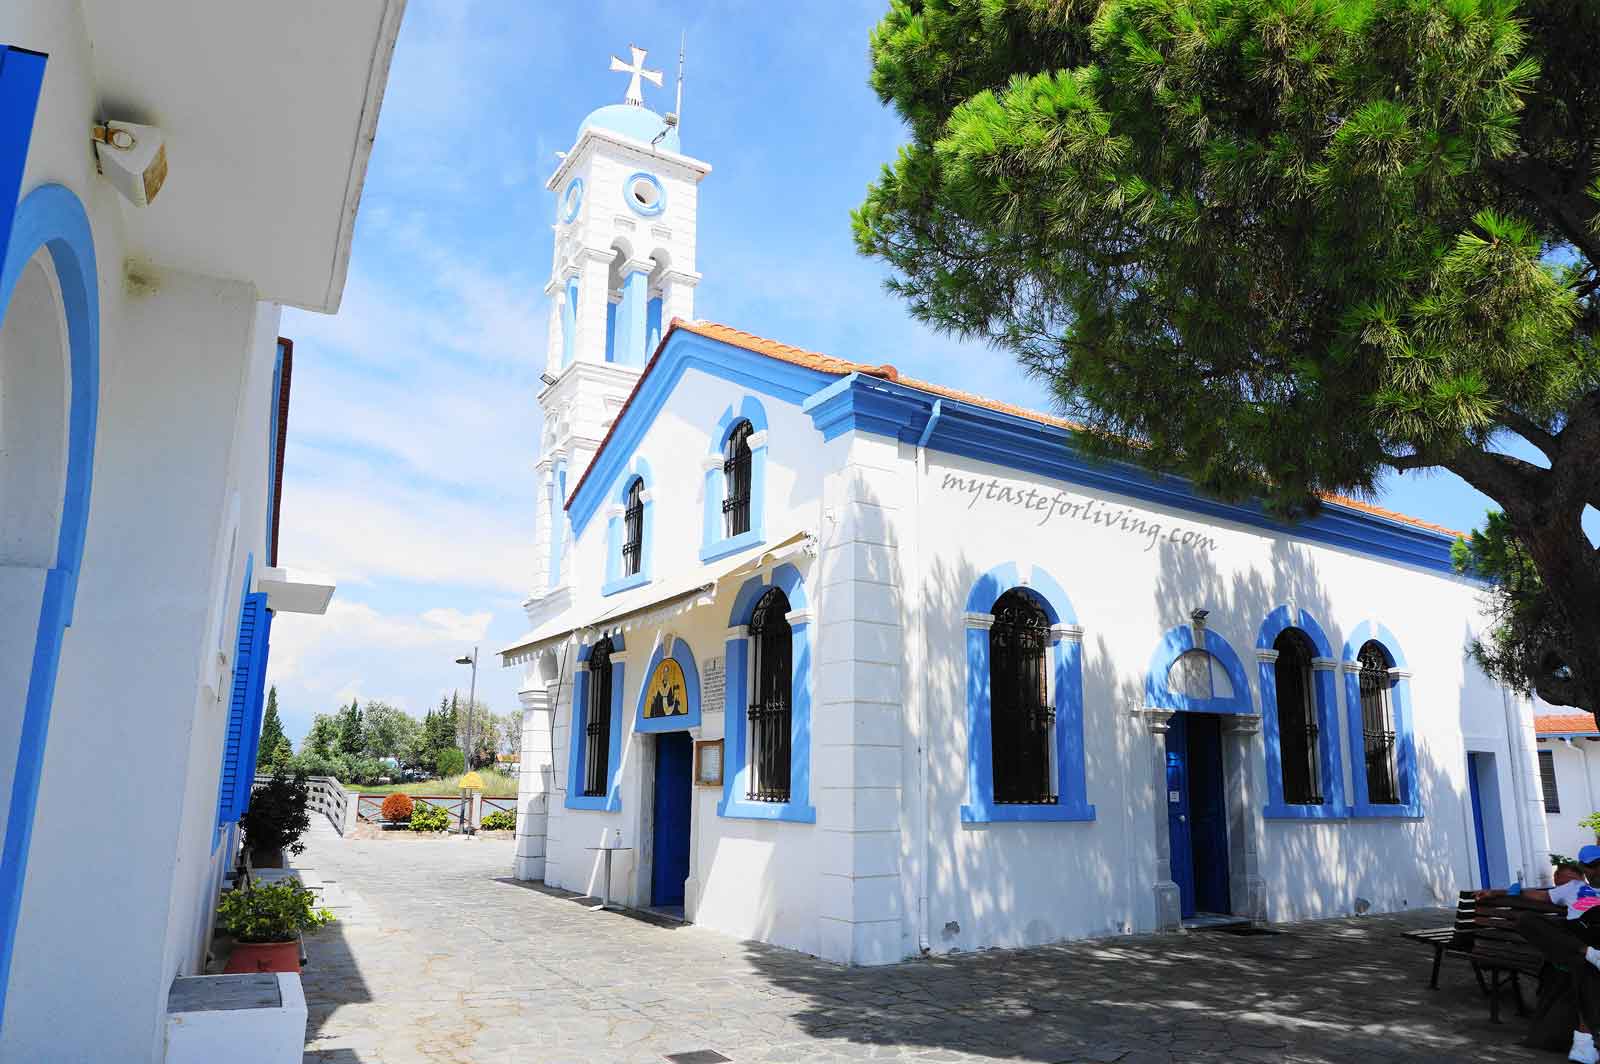 Monastery of St. Nicholas is located on a small island in lake Vistonida, near the fishing village of Porto Lagos, Greece. It attracts a large number of visitors and pilgrims every year due to the exotic view and landscape of the Thracian Sea, which people can enjoy.